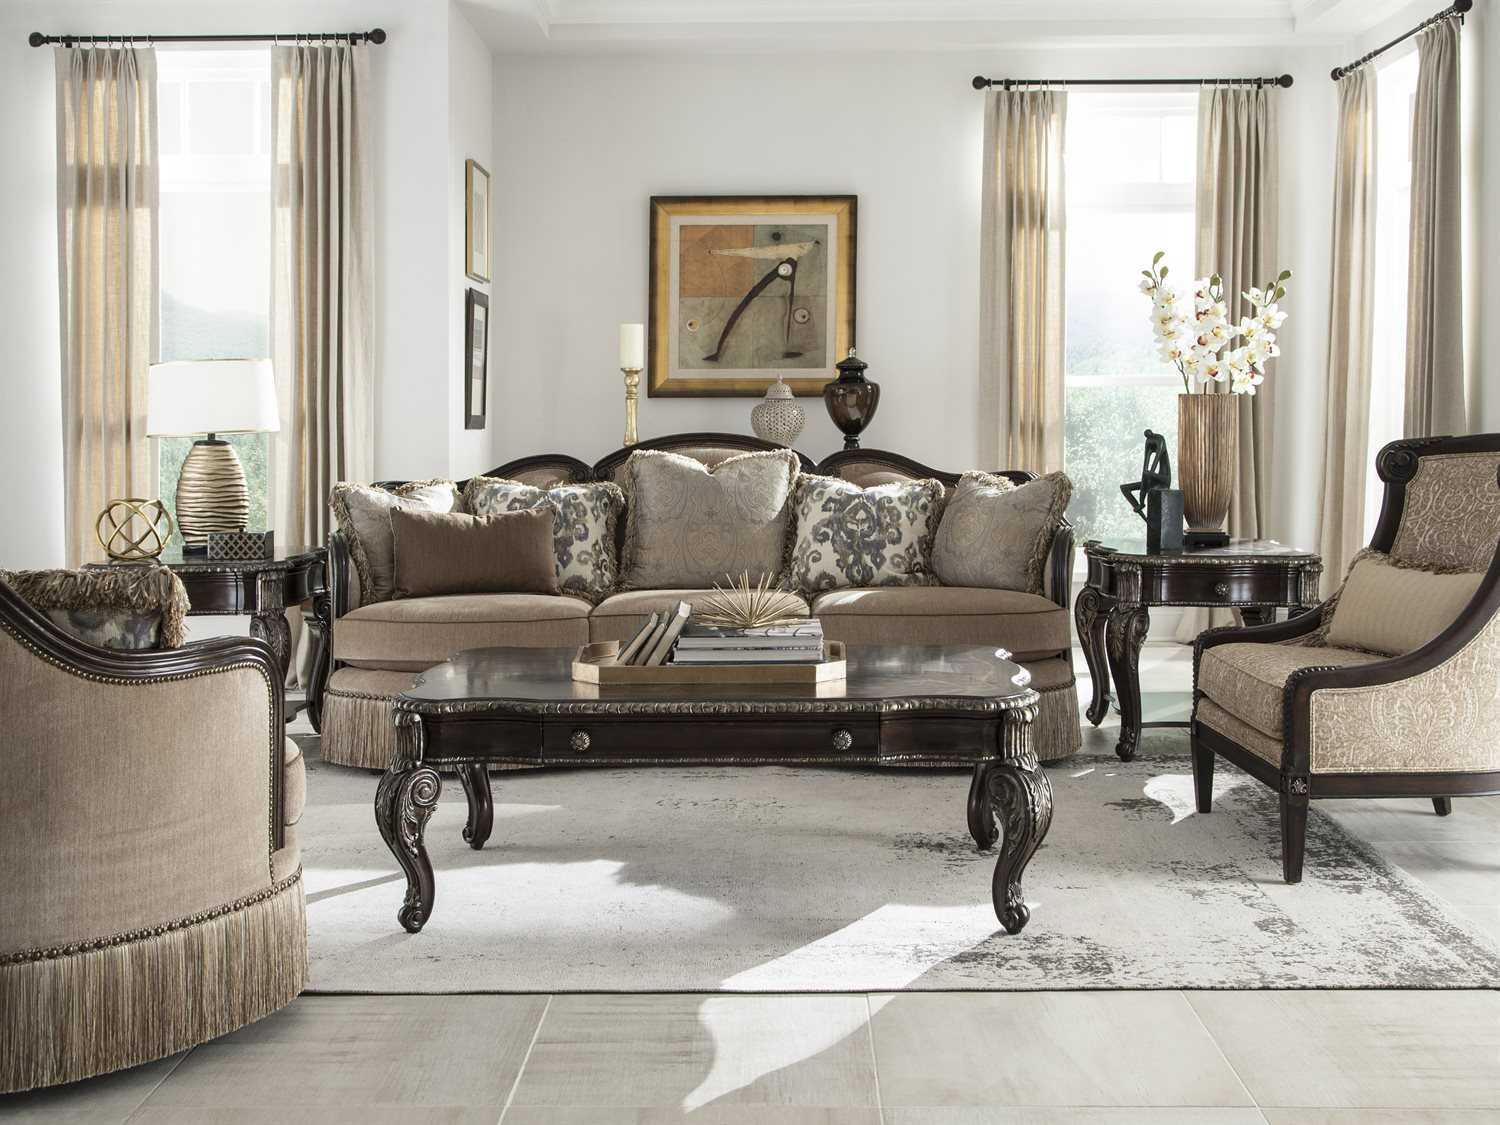 

    
Contemporary Tan & Beige Sofa w/ Accent Pillows by A.R.T. Furniture Giovanna
